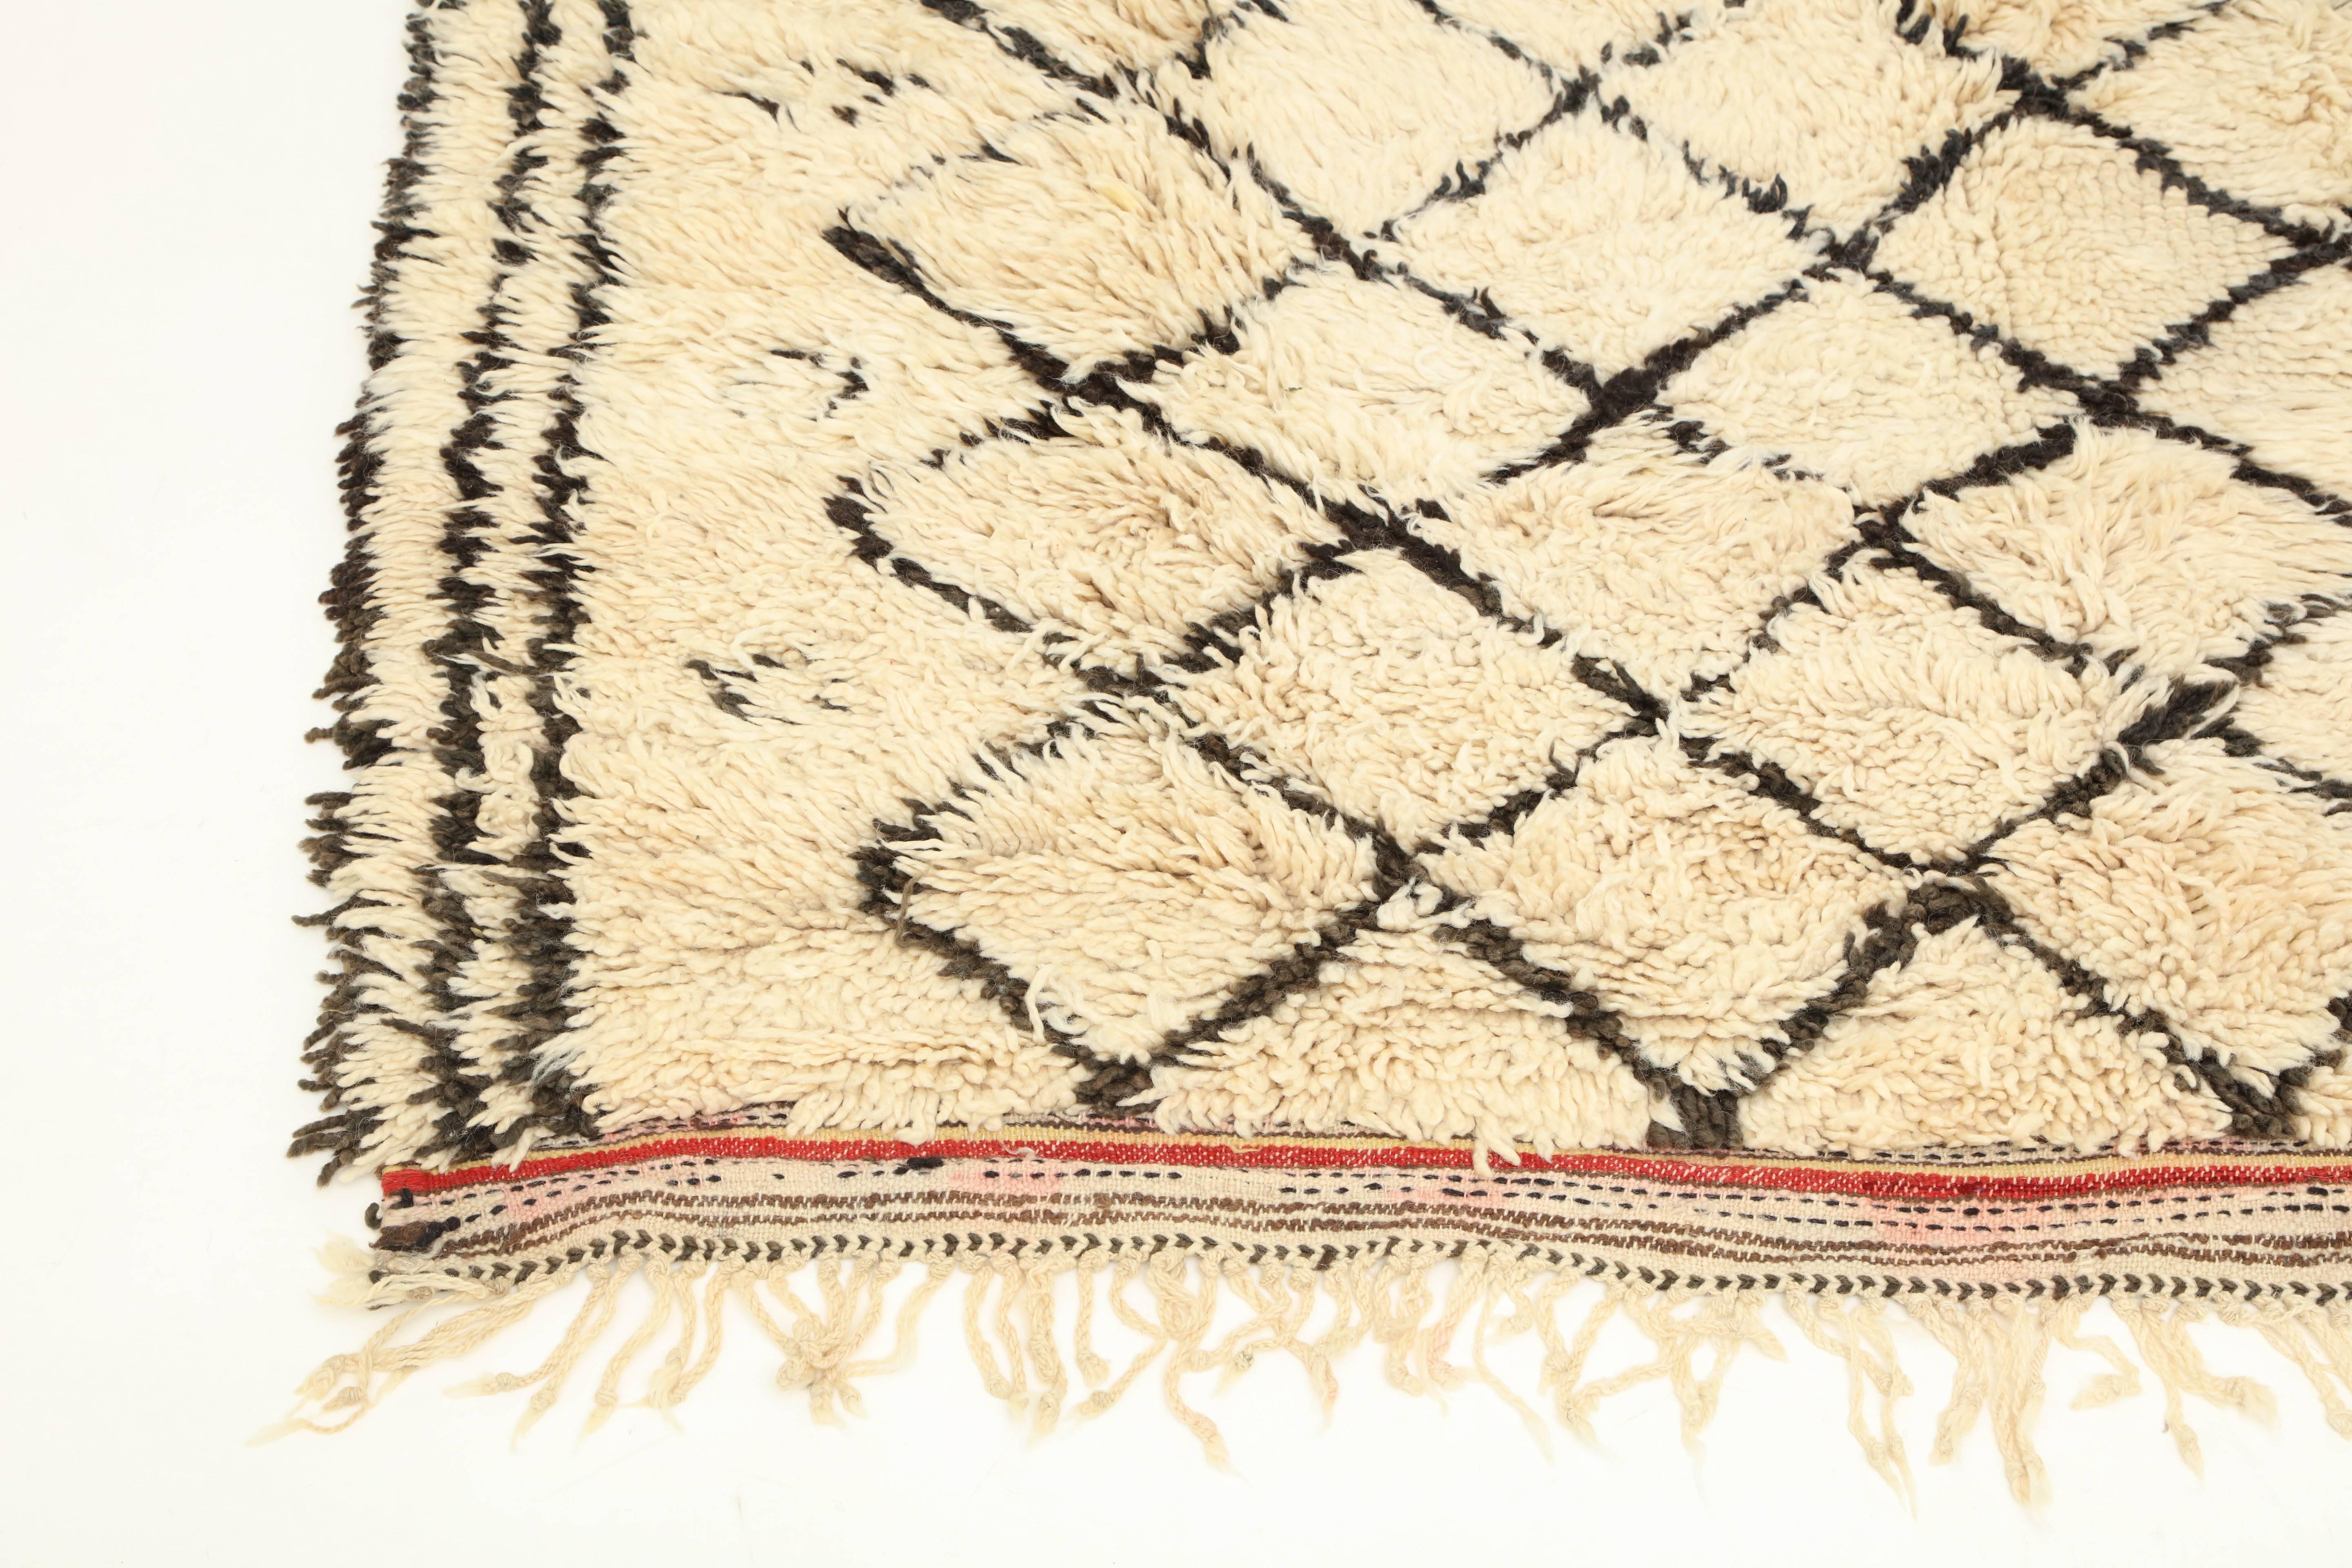 Late 20th Century Rug, Vintage Beni Ourain Moroccan Rug, Ivory and Black